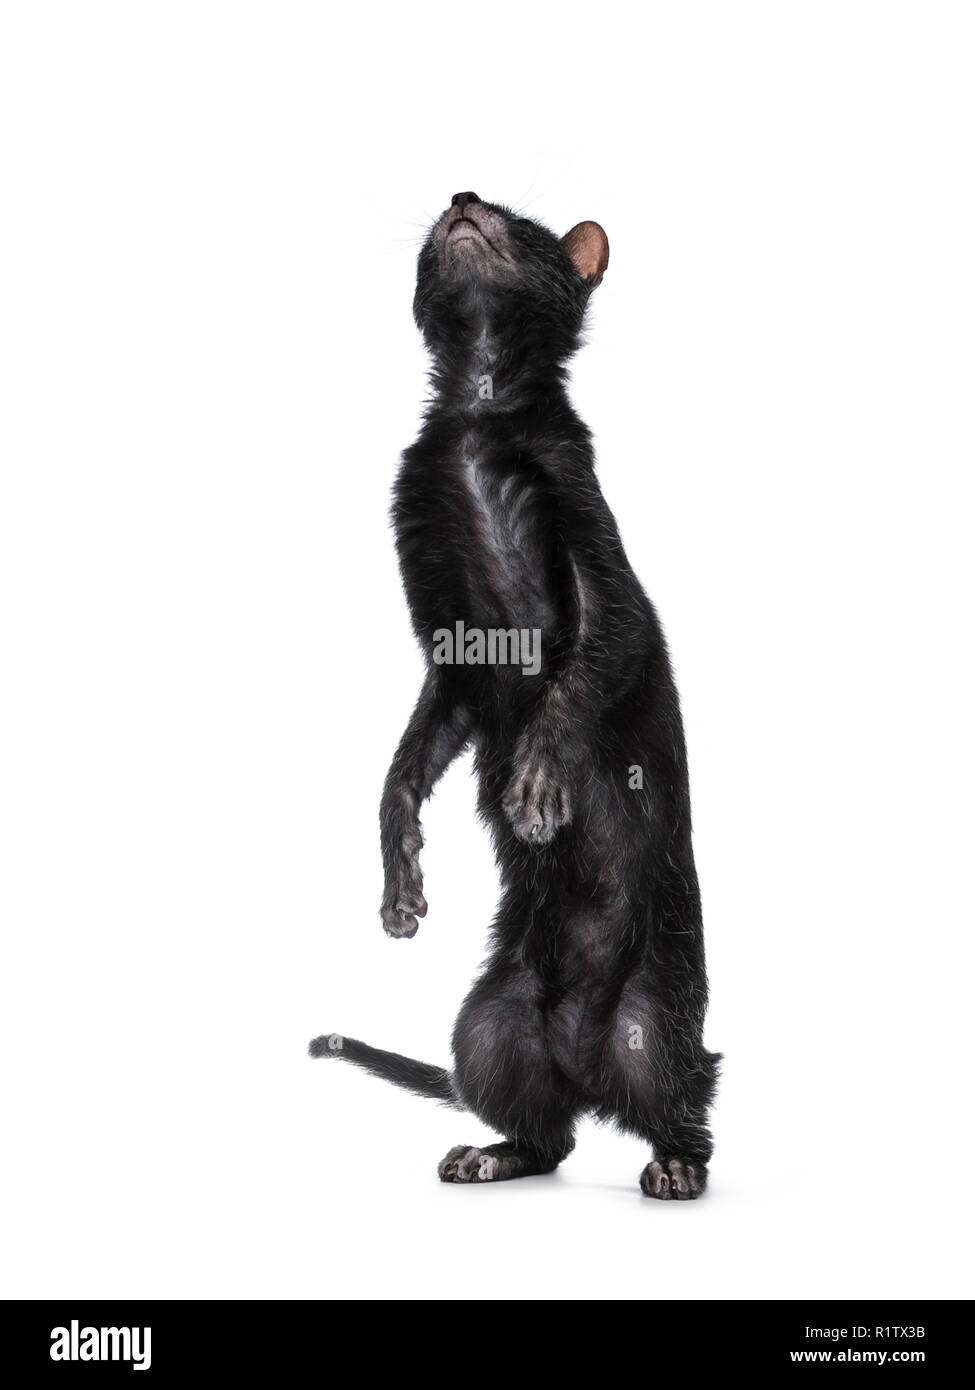 Cute young Lykoi / werewolf cat kitten standing / jumping on back paws. Isolated on a white background. Stock Photo